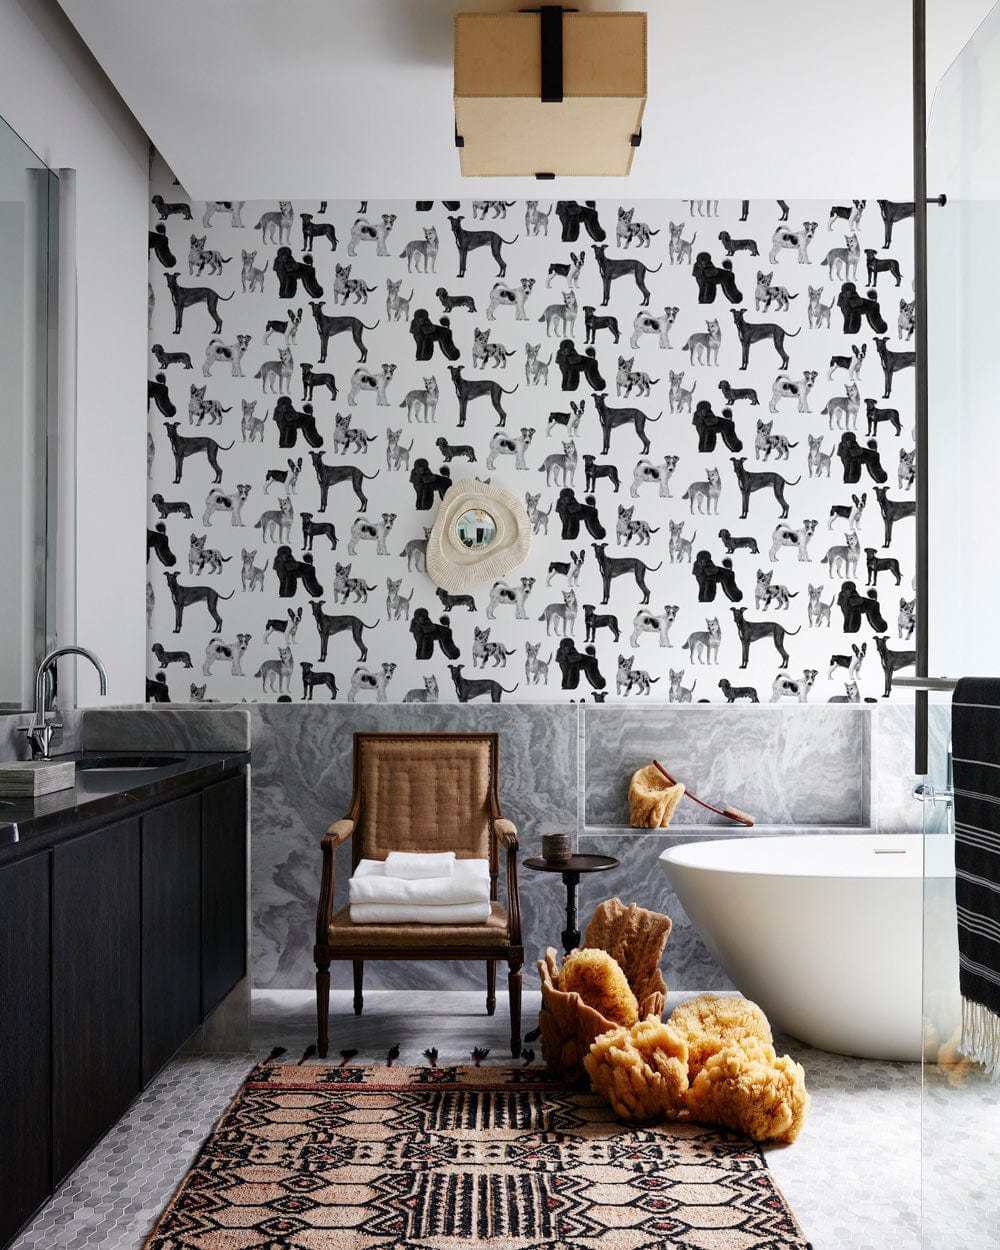 nice bathroom wall murals with a repetitive pattern of dogs